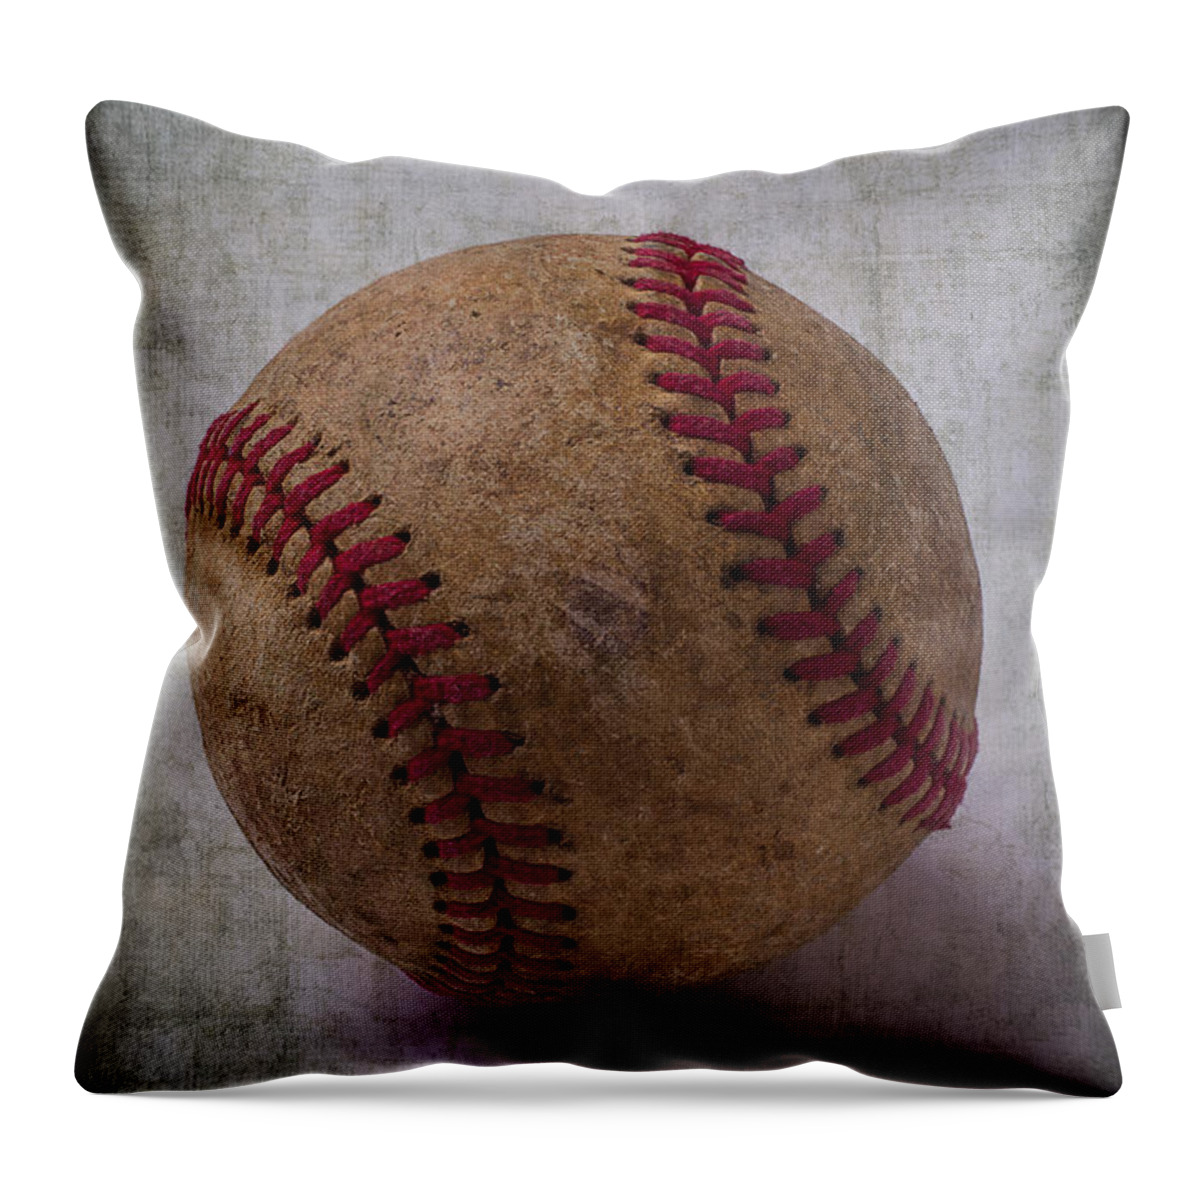 Old Throw Pillow featuring the photograph Old Baseball by Garry Gay